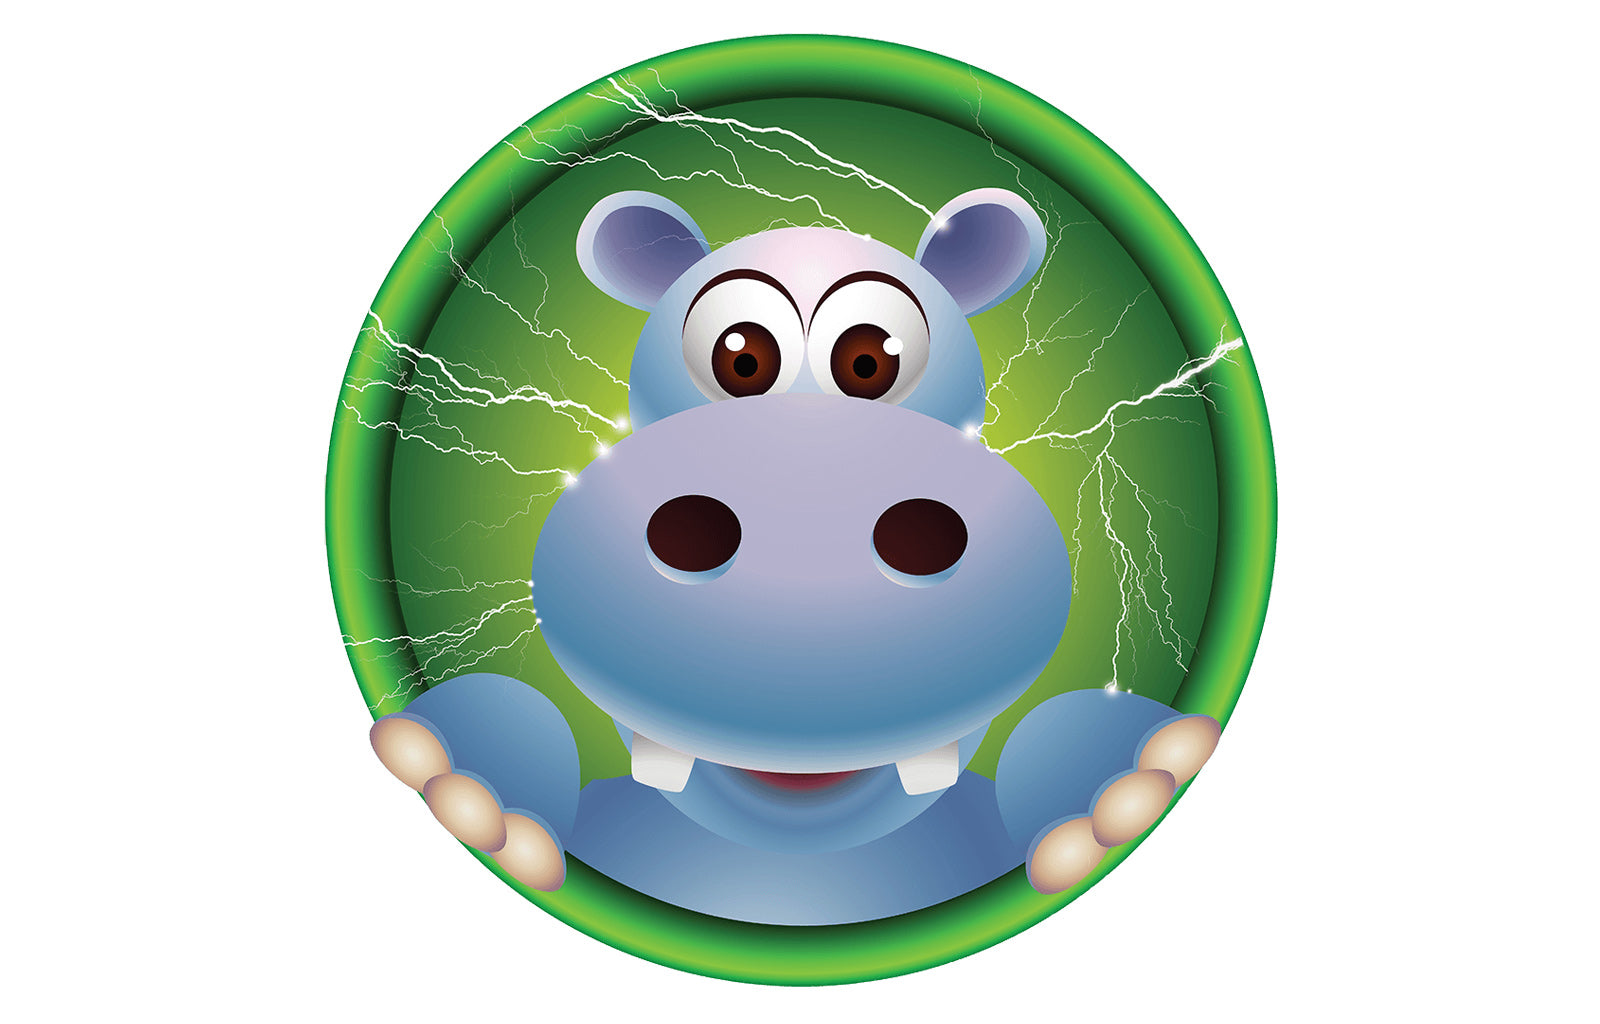 Featured Image of Puddles the Hippo character representing the Happy Hippo Product White Malay Kratom Powder (Thunder Hippo)